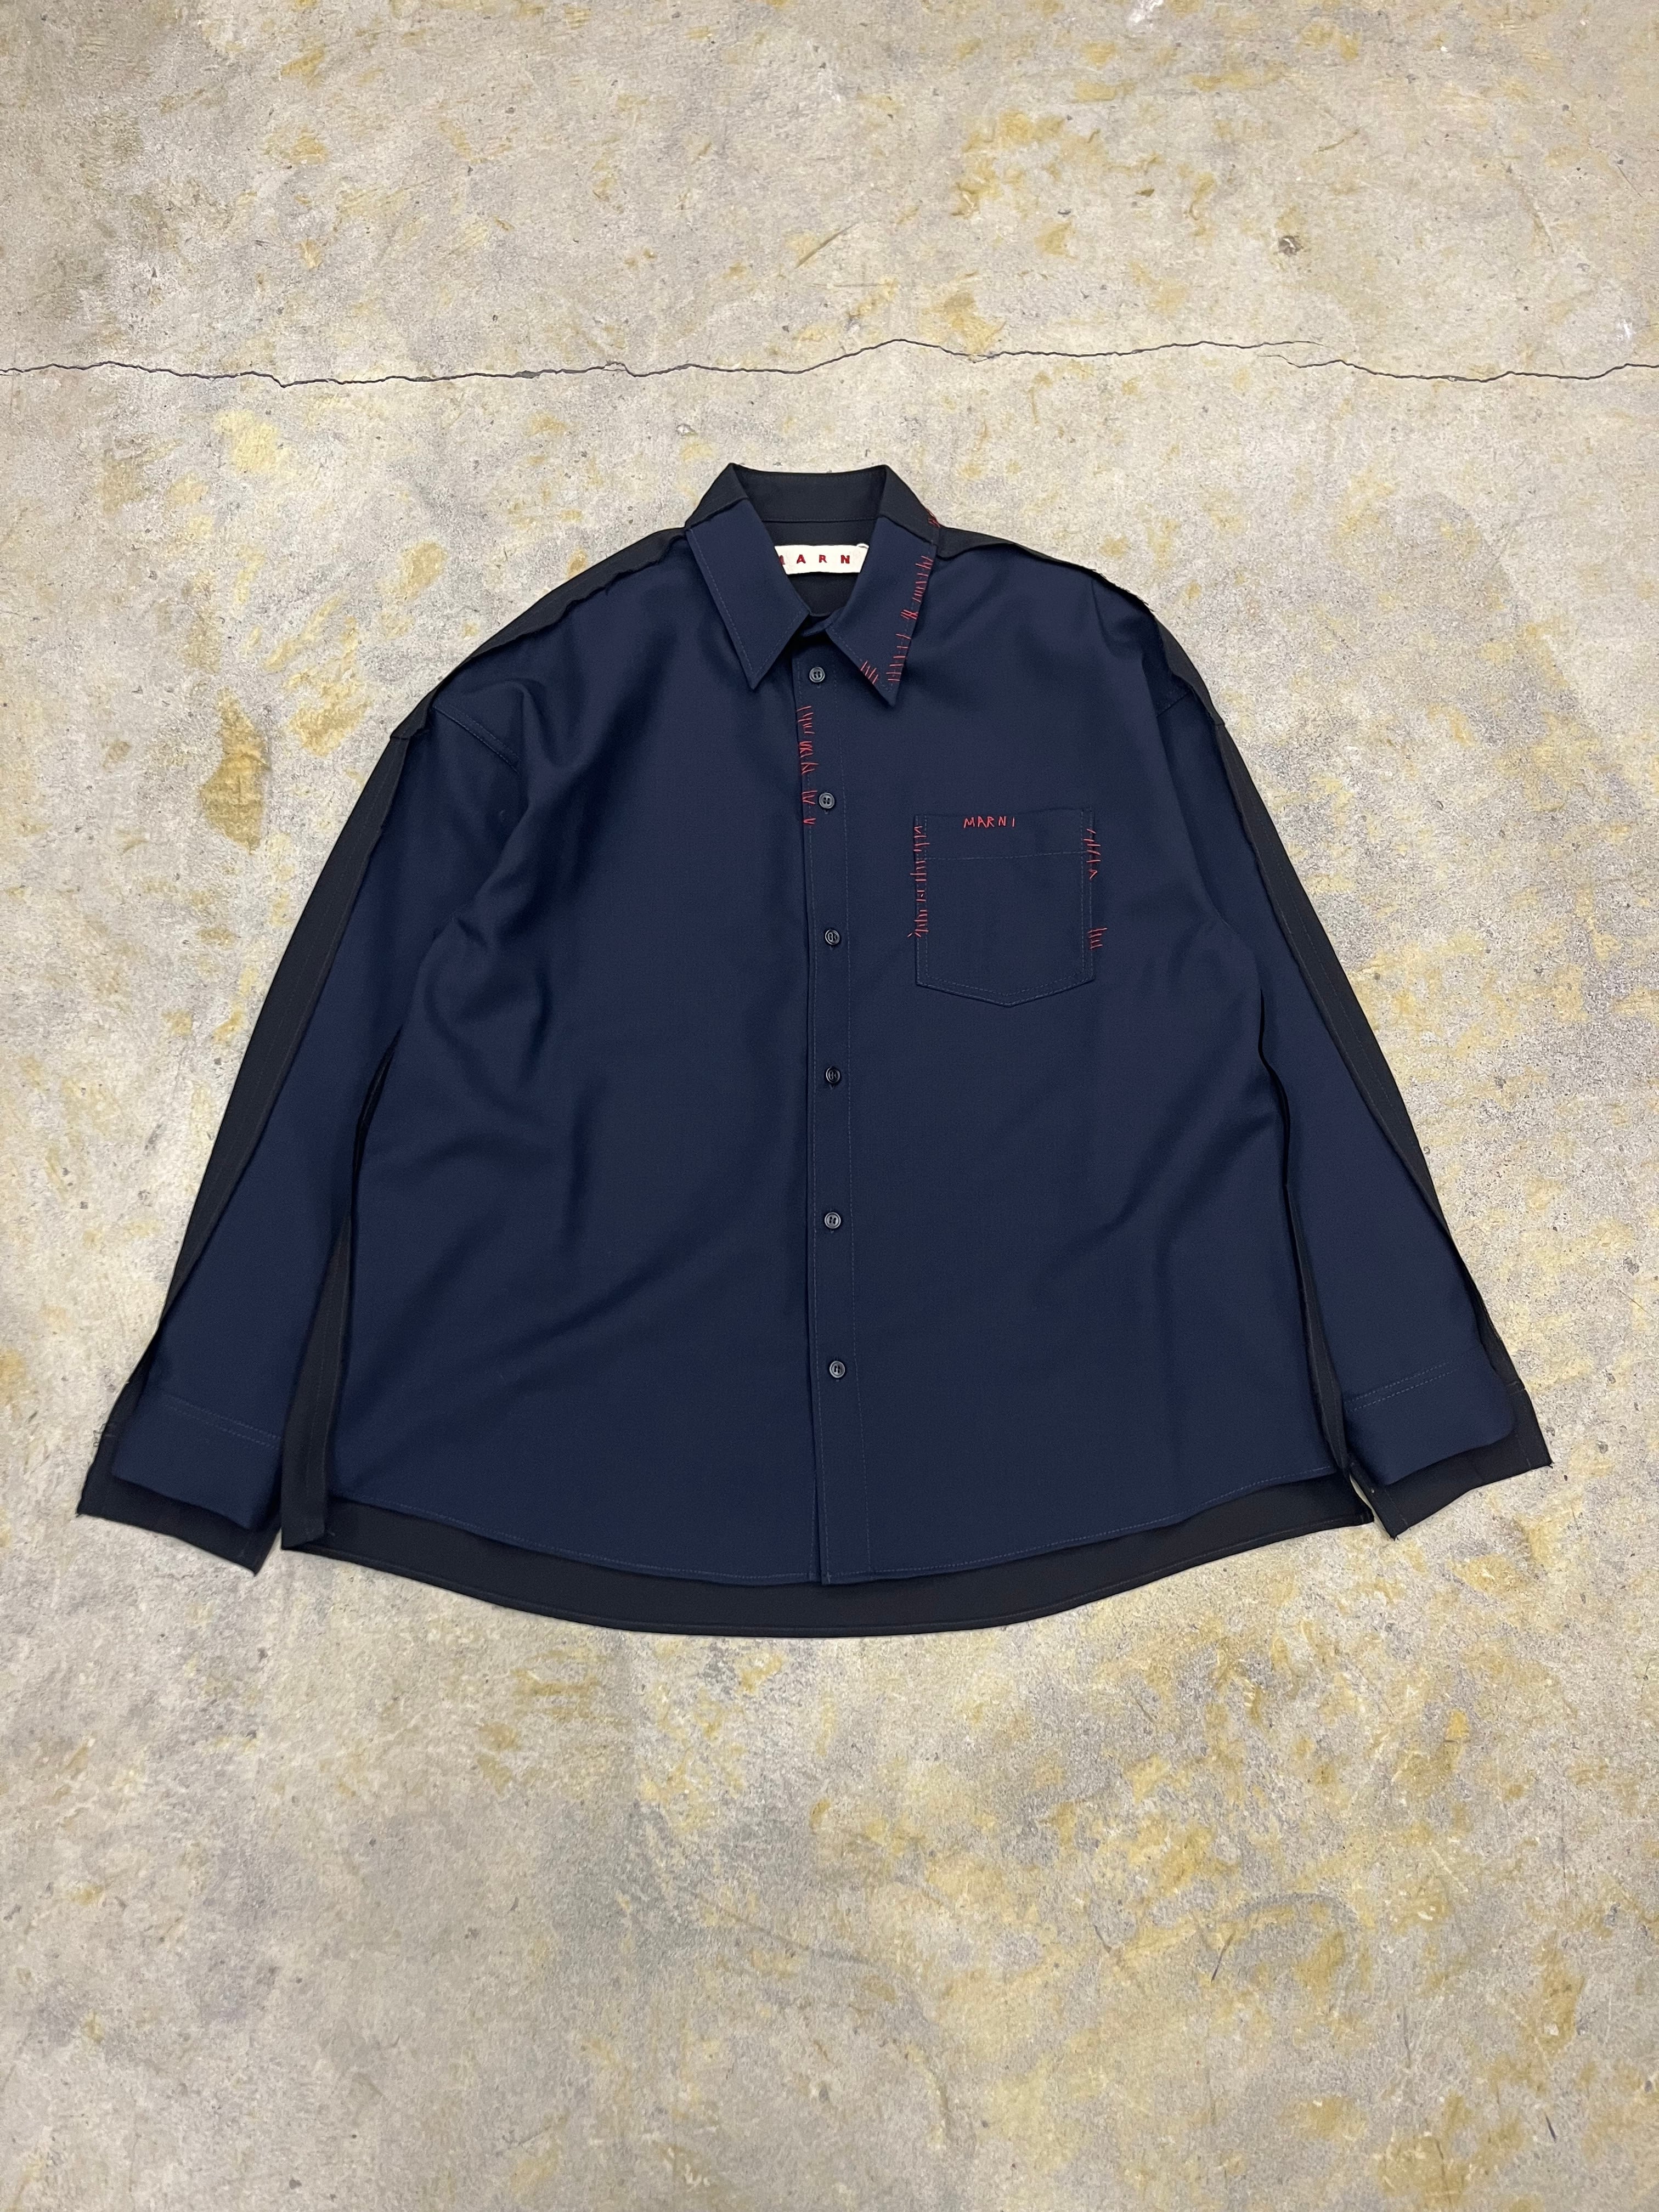 MARNI | CONTRAST BACK TROPICAL WOOL SHIRT | NAVY | HOWDAY